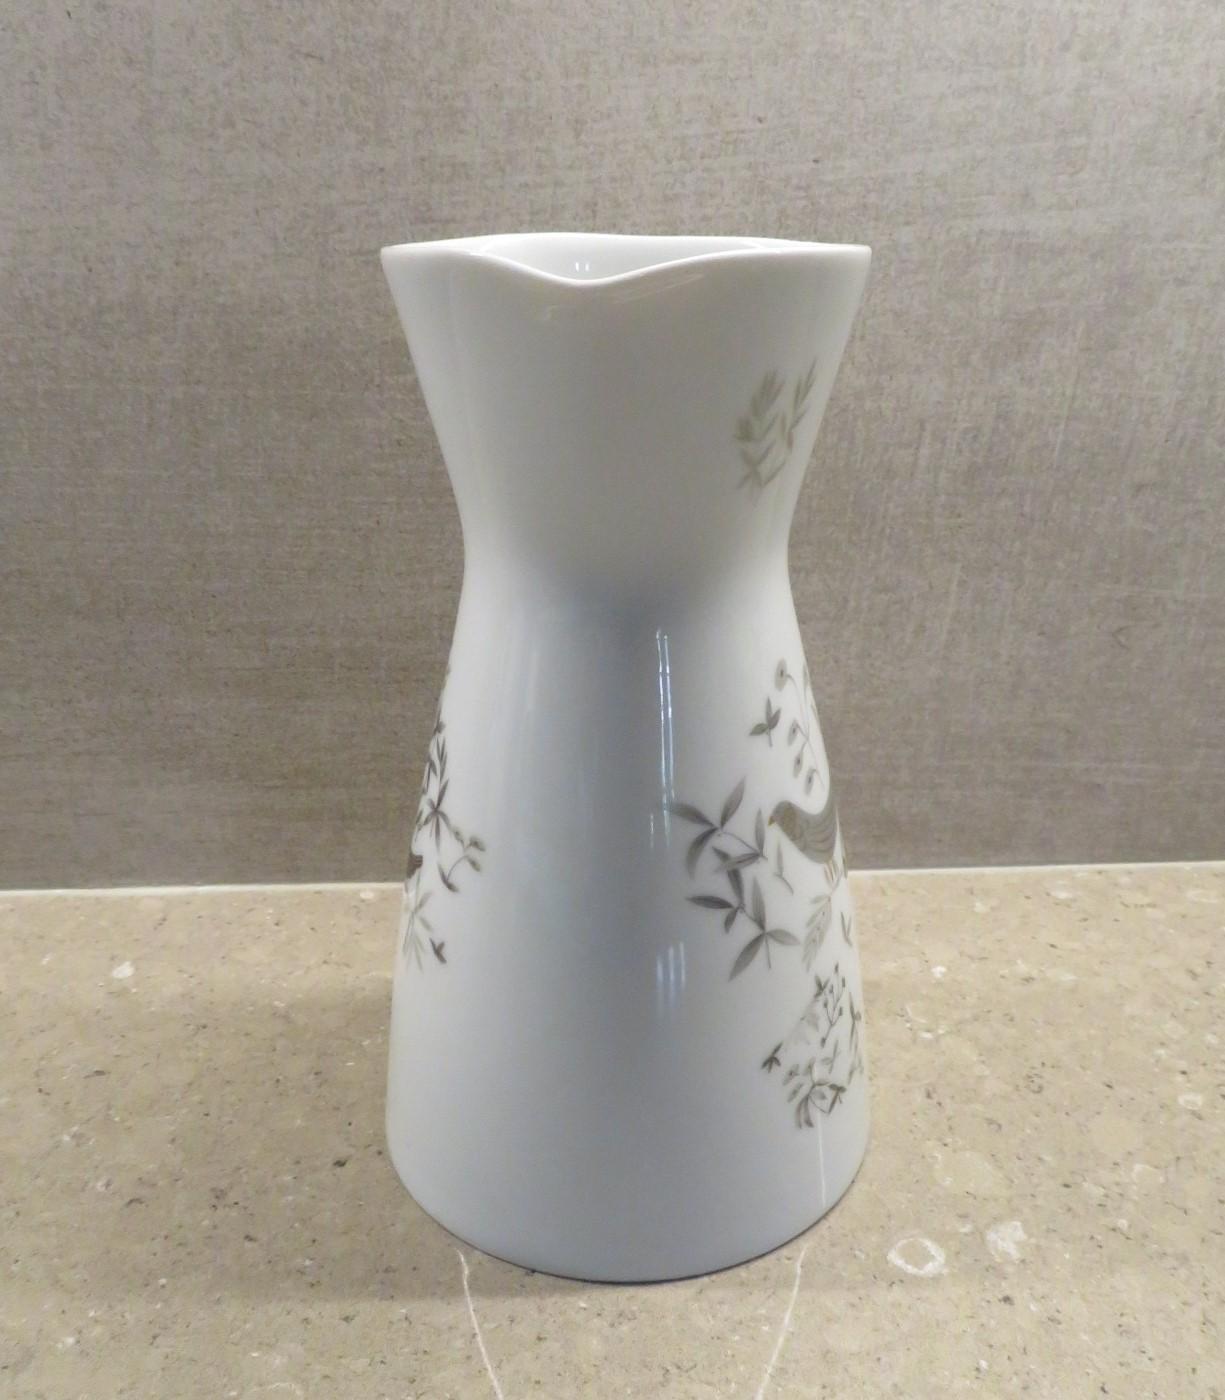 Ceramic Modern Birds on Trees Water Pitcher by Raymond Loewy for Rosenthal, 1960s